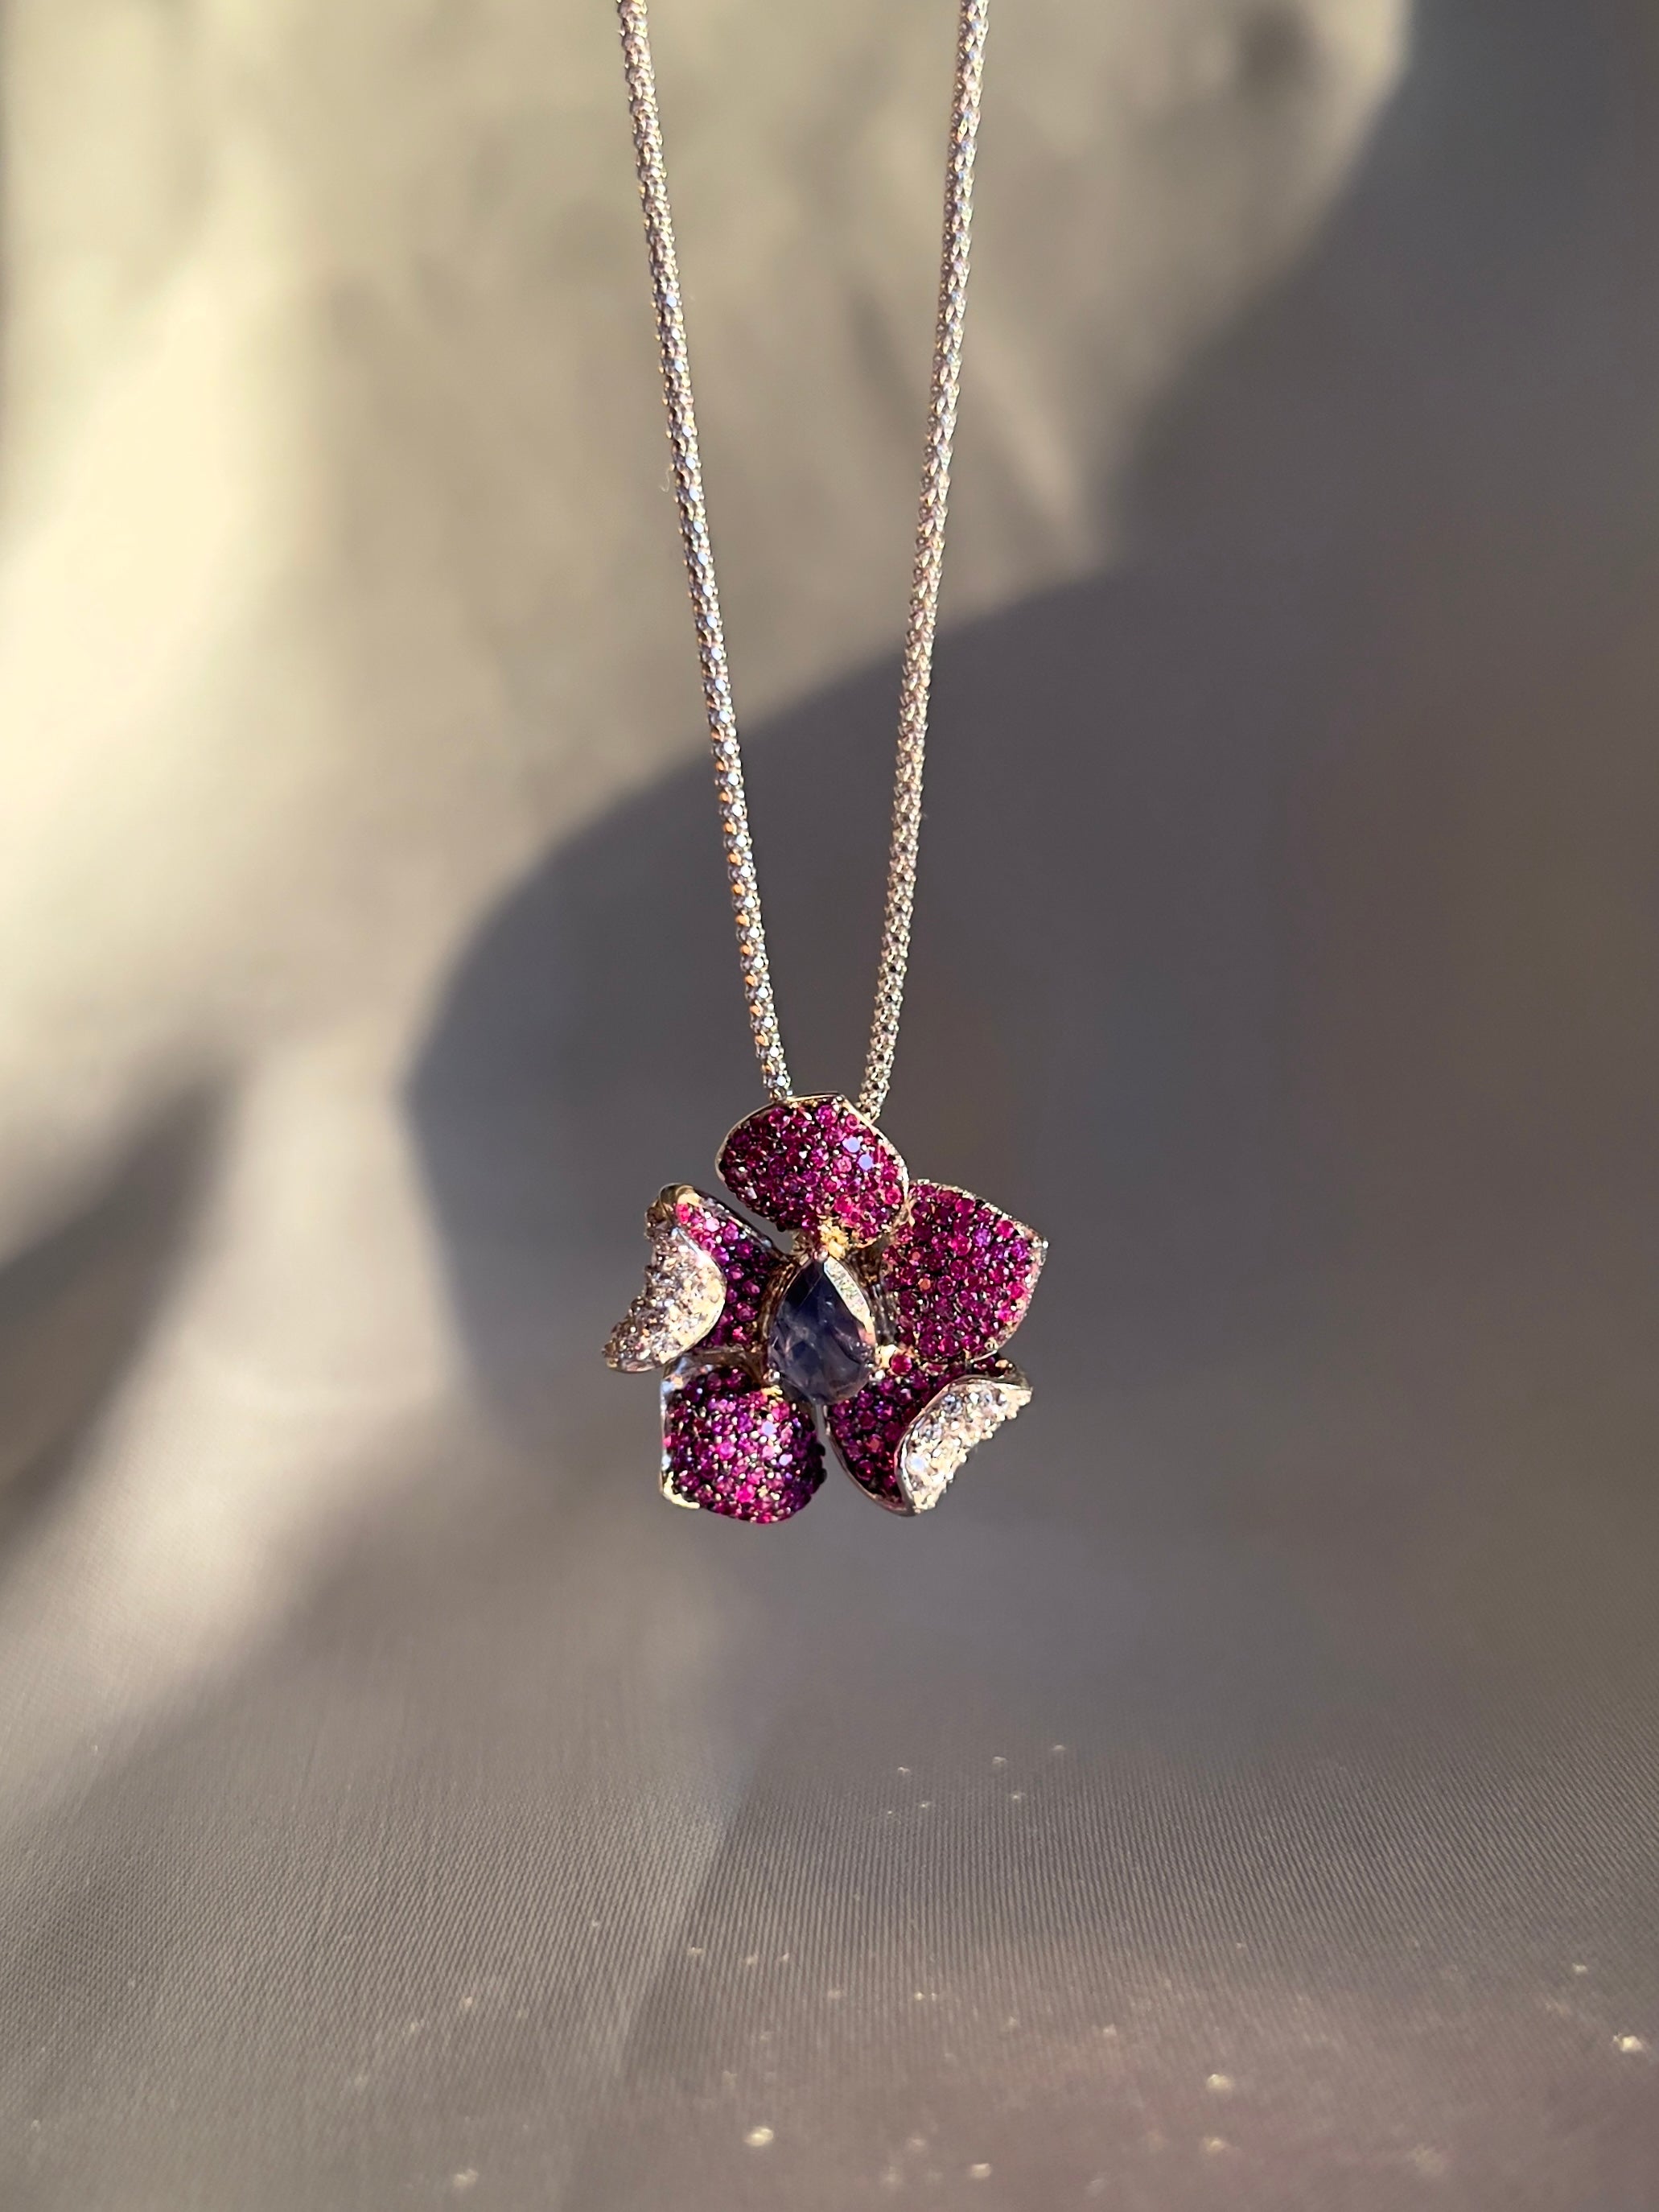 18k White Gold Ruby Sapphire & Diamond Flower Pendant Necklace  by BOITE LAQUE Jewelry